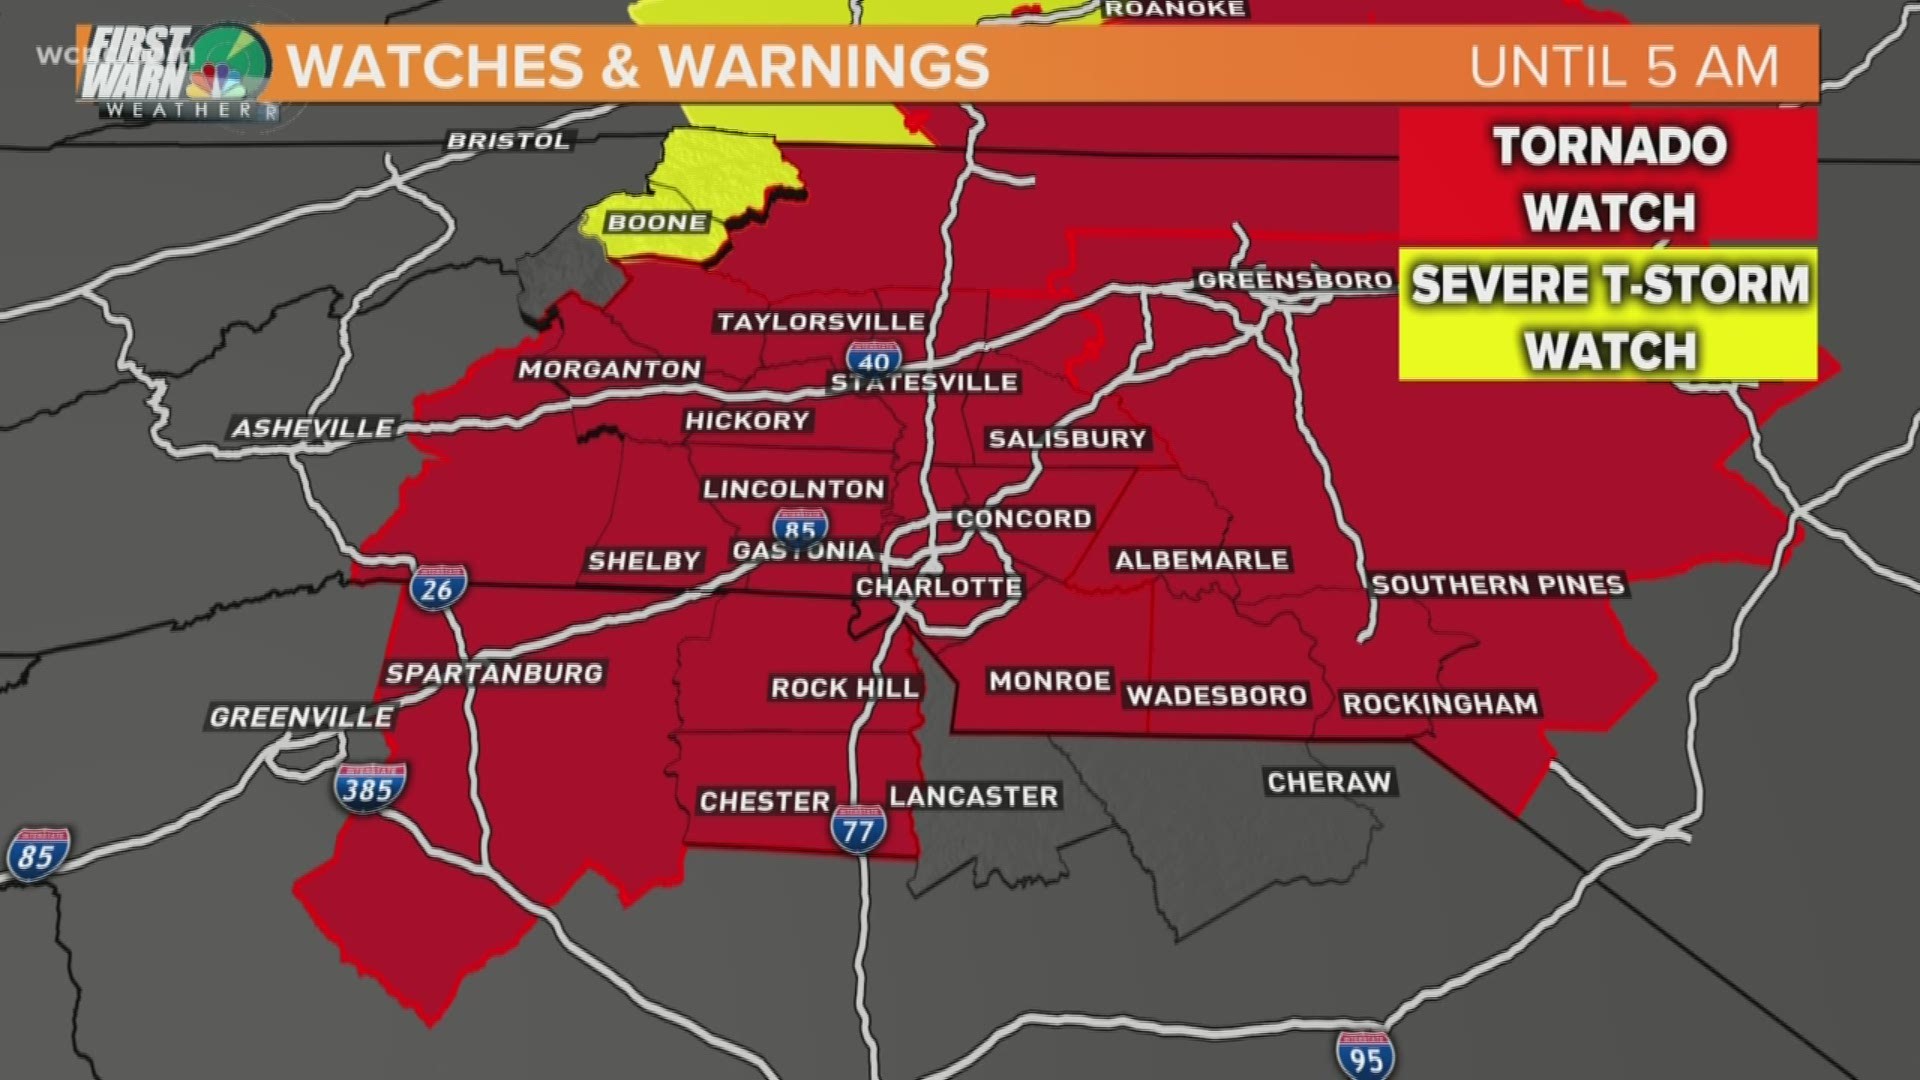 There is still potential for rotating wall clouds or funnel clouds going into Monday morning, with a tornado watch for much of the Carolinas up until 5 a.m.